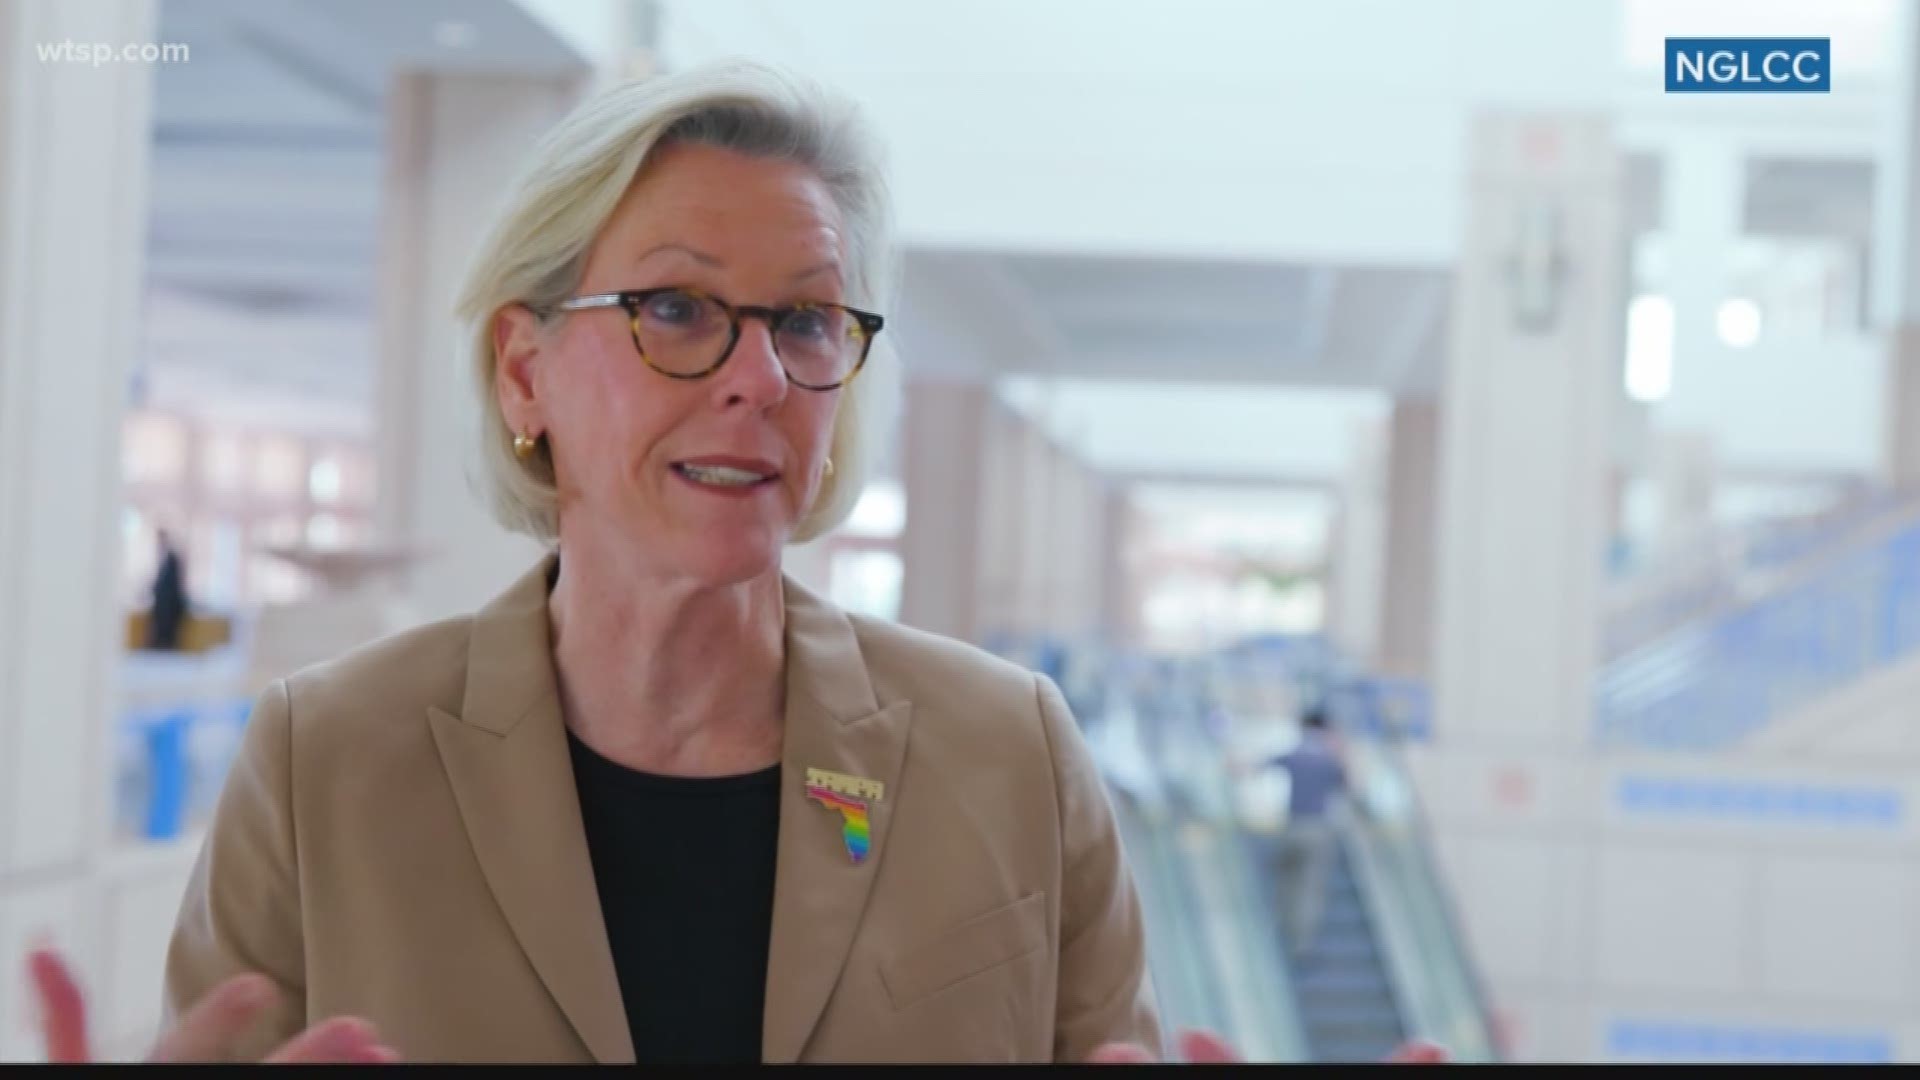 At the National LGBT Chamber of Commerce conference held in Tampa this week, Mayor Castor made a major announcement. 

"We are very excited that we rolled out our LGBT small business initiative. So now, any certified LGBT business can bid for contracts with the city."